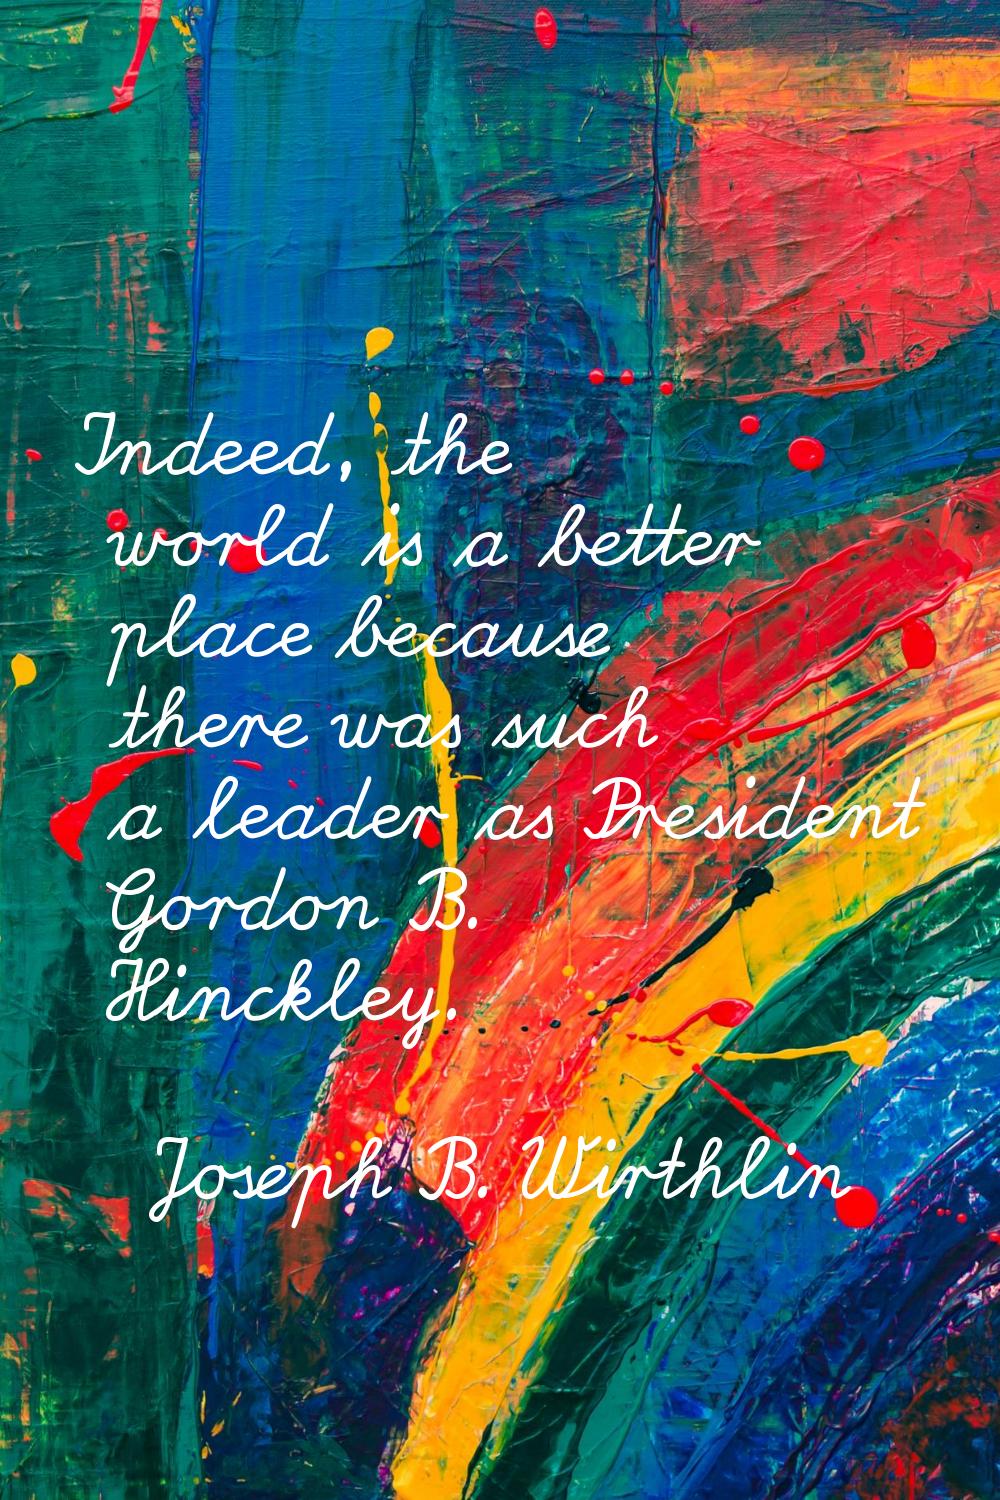 Indeed, the world is a better place because there was such a leader as President Gordon B. Hinckley